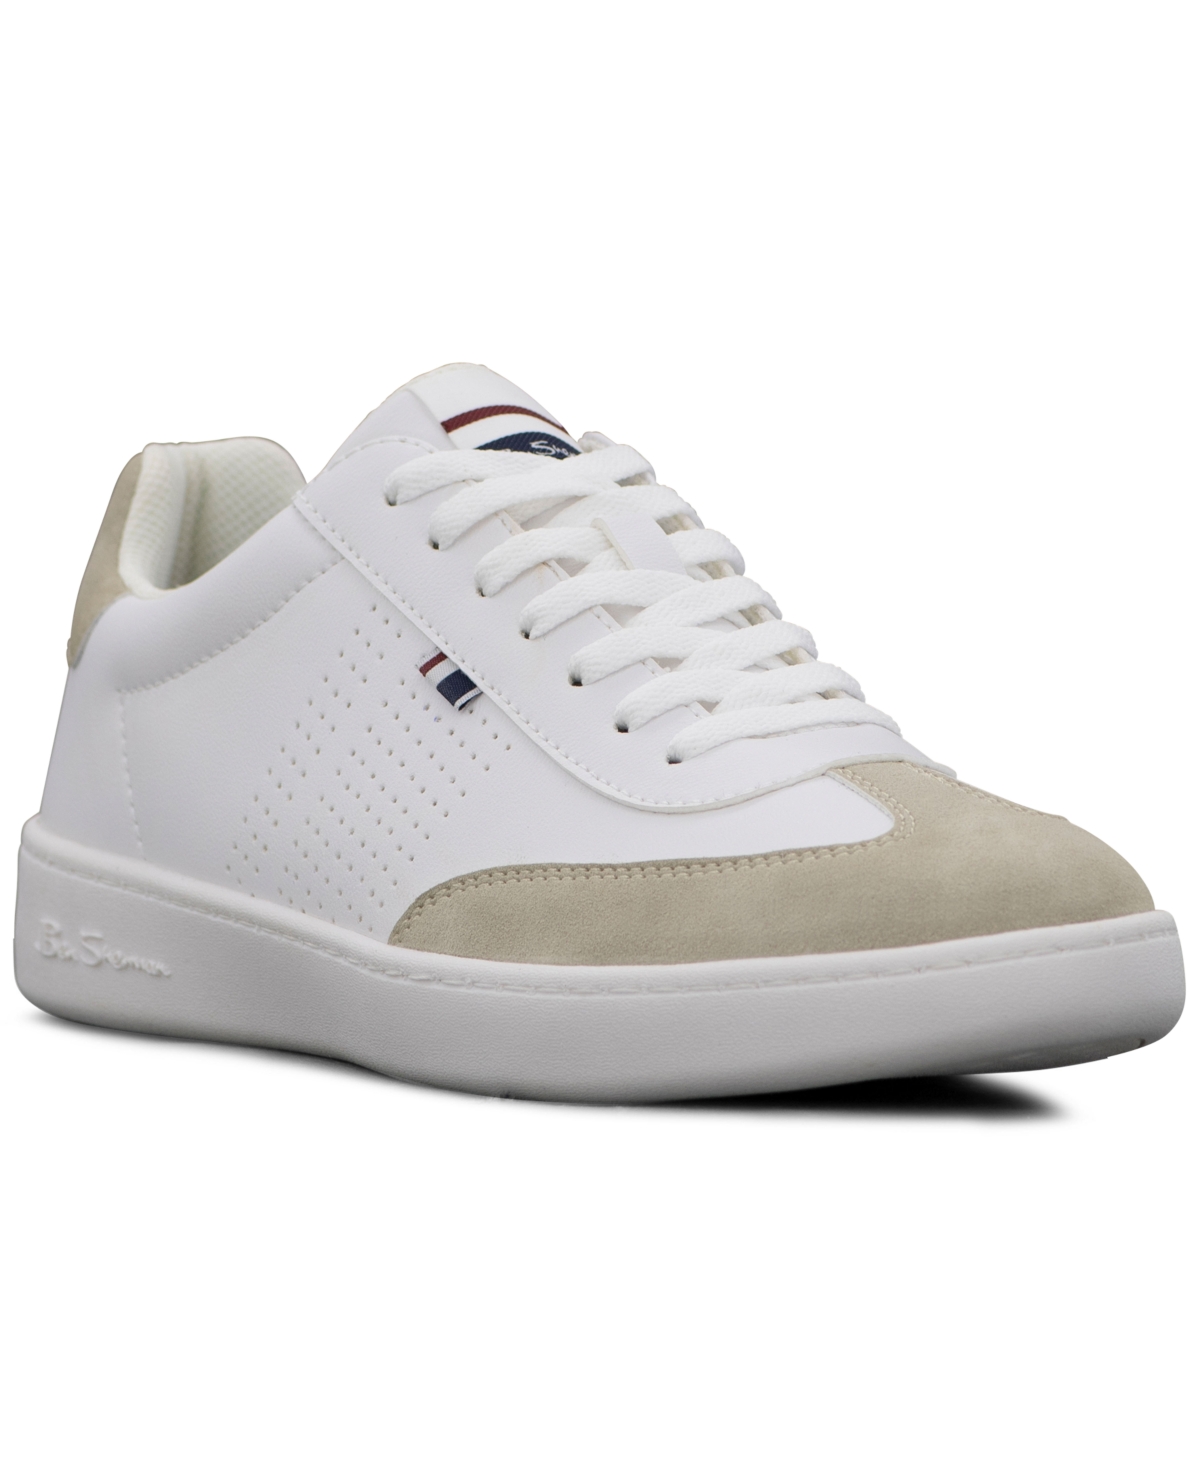 Men's Glasgow Low Casual Sneakers from Finish Line - White/Beige